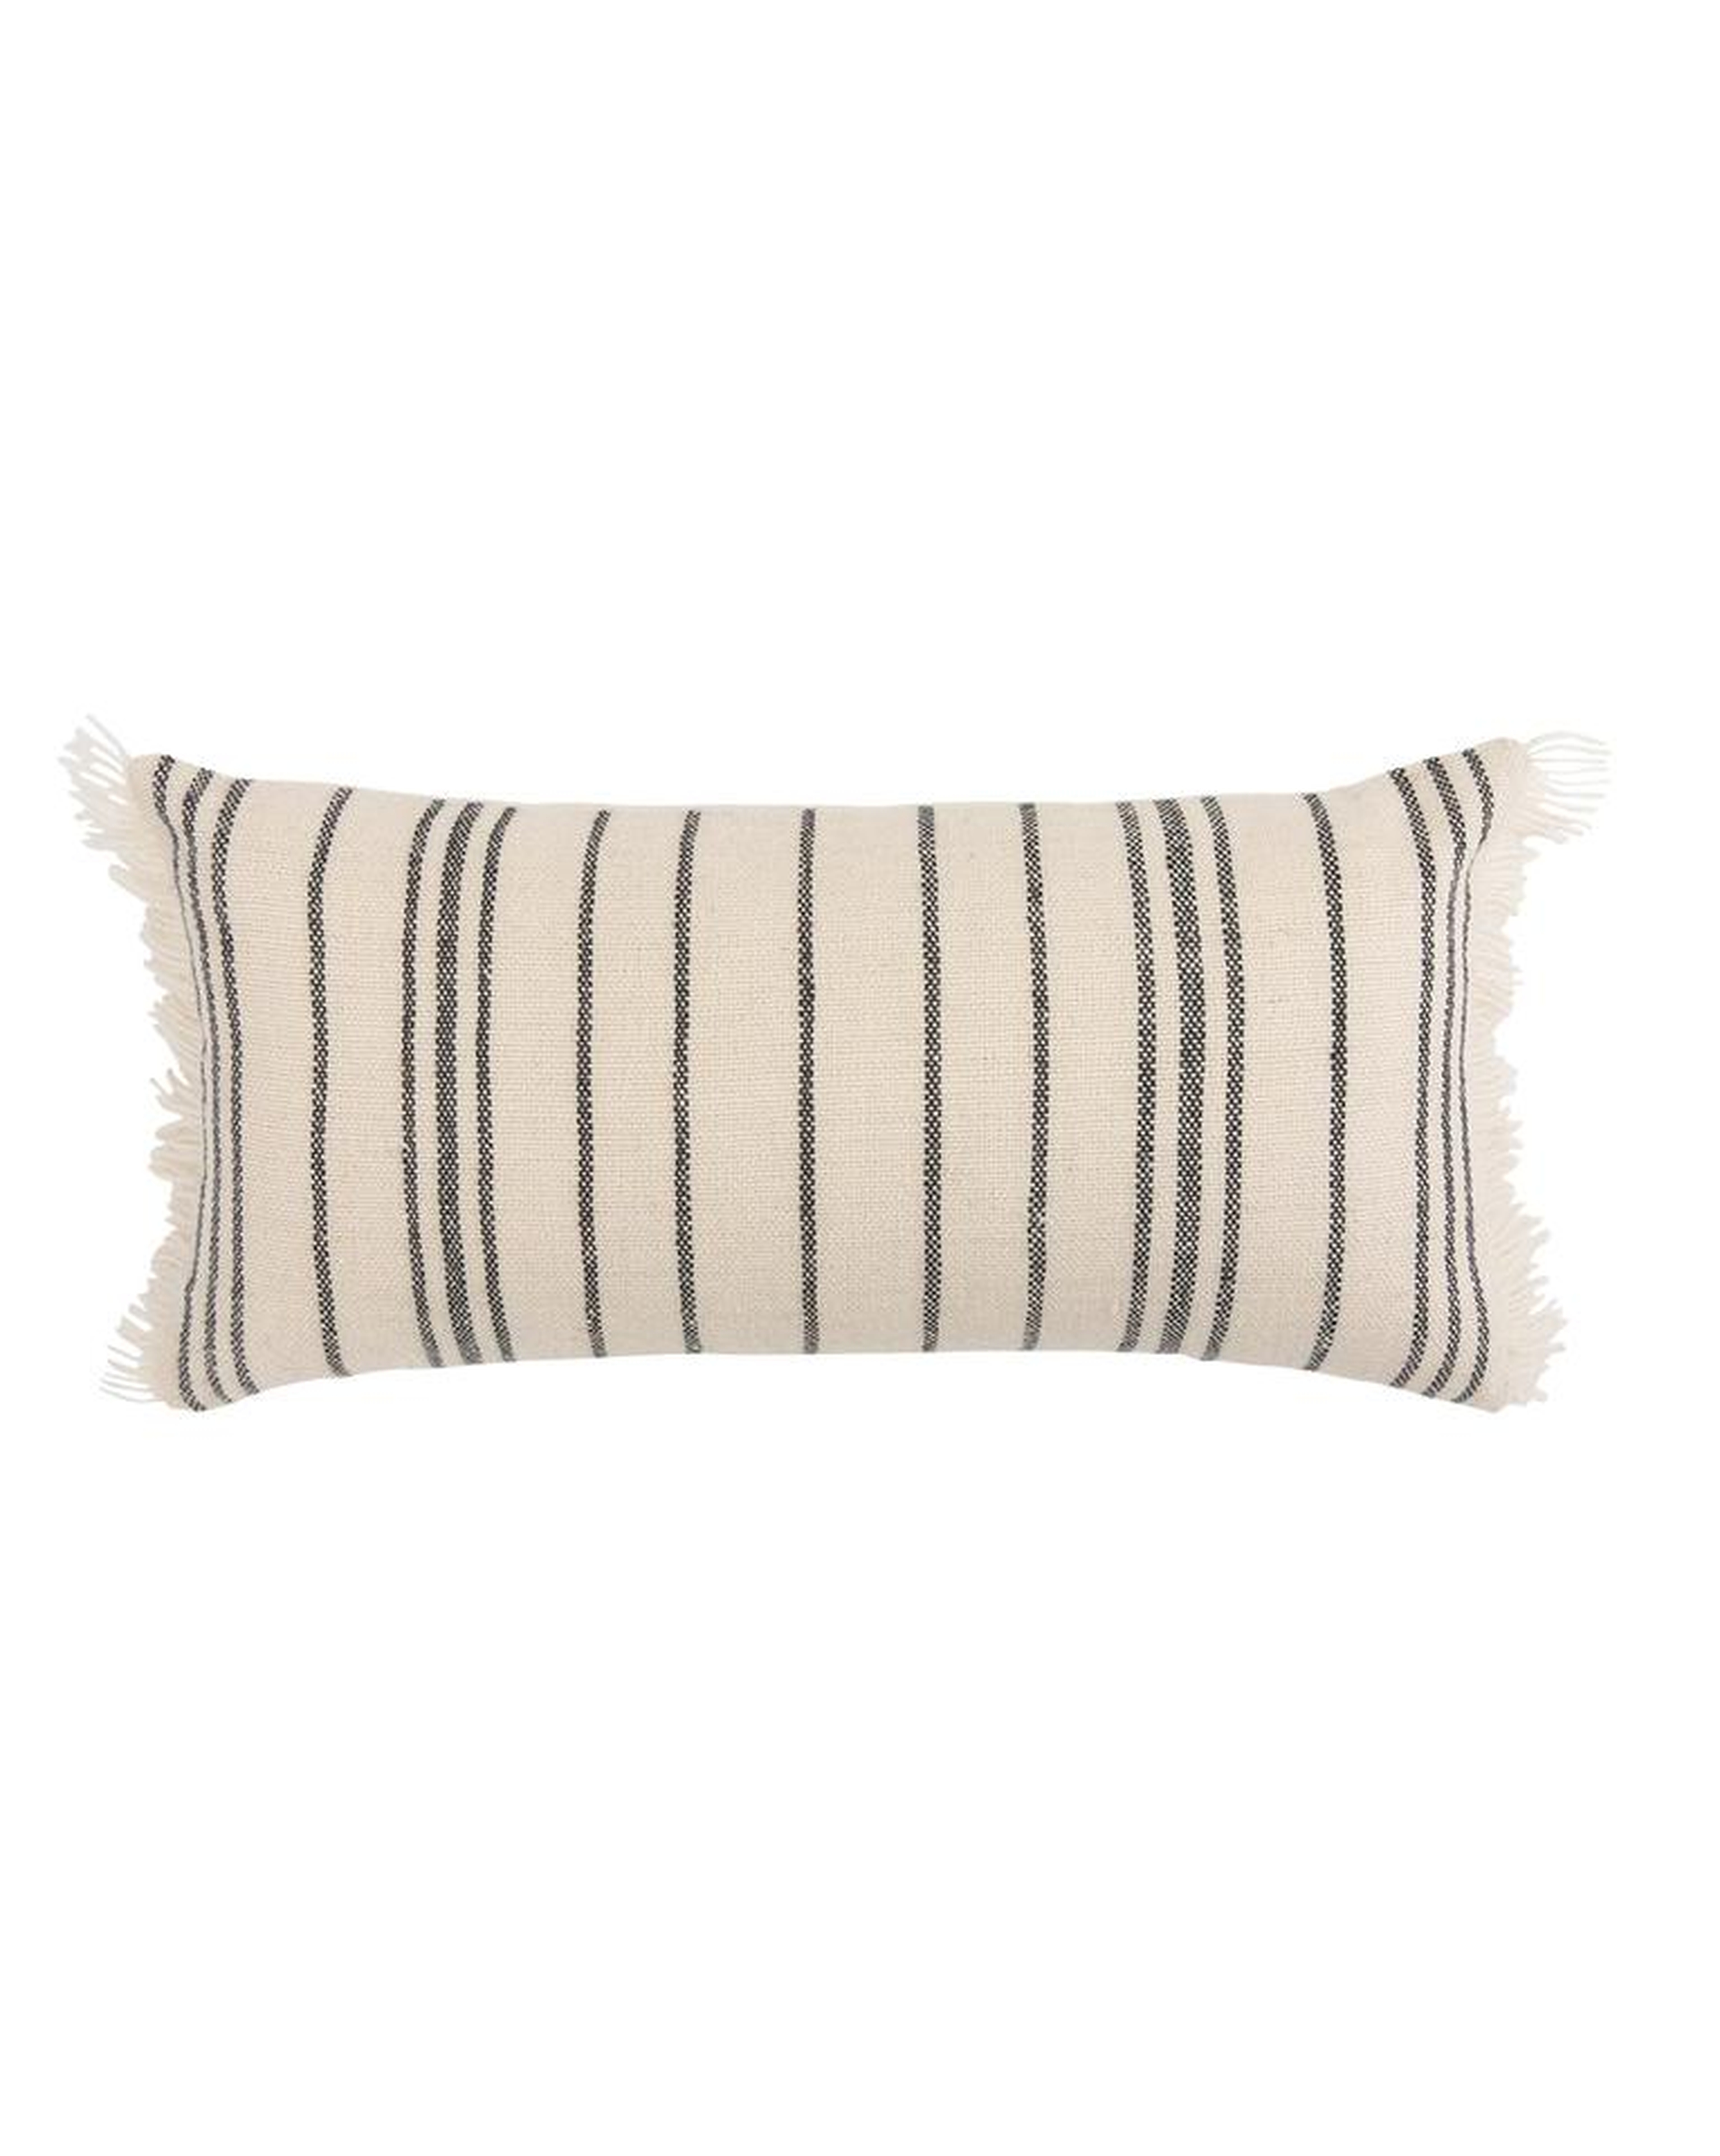 WRIGHT WOVEN PILLOW COVER - McGee & Co.